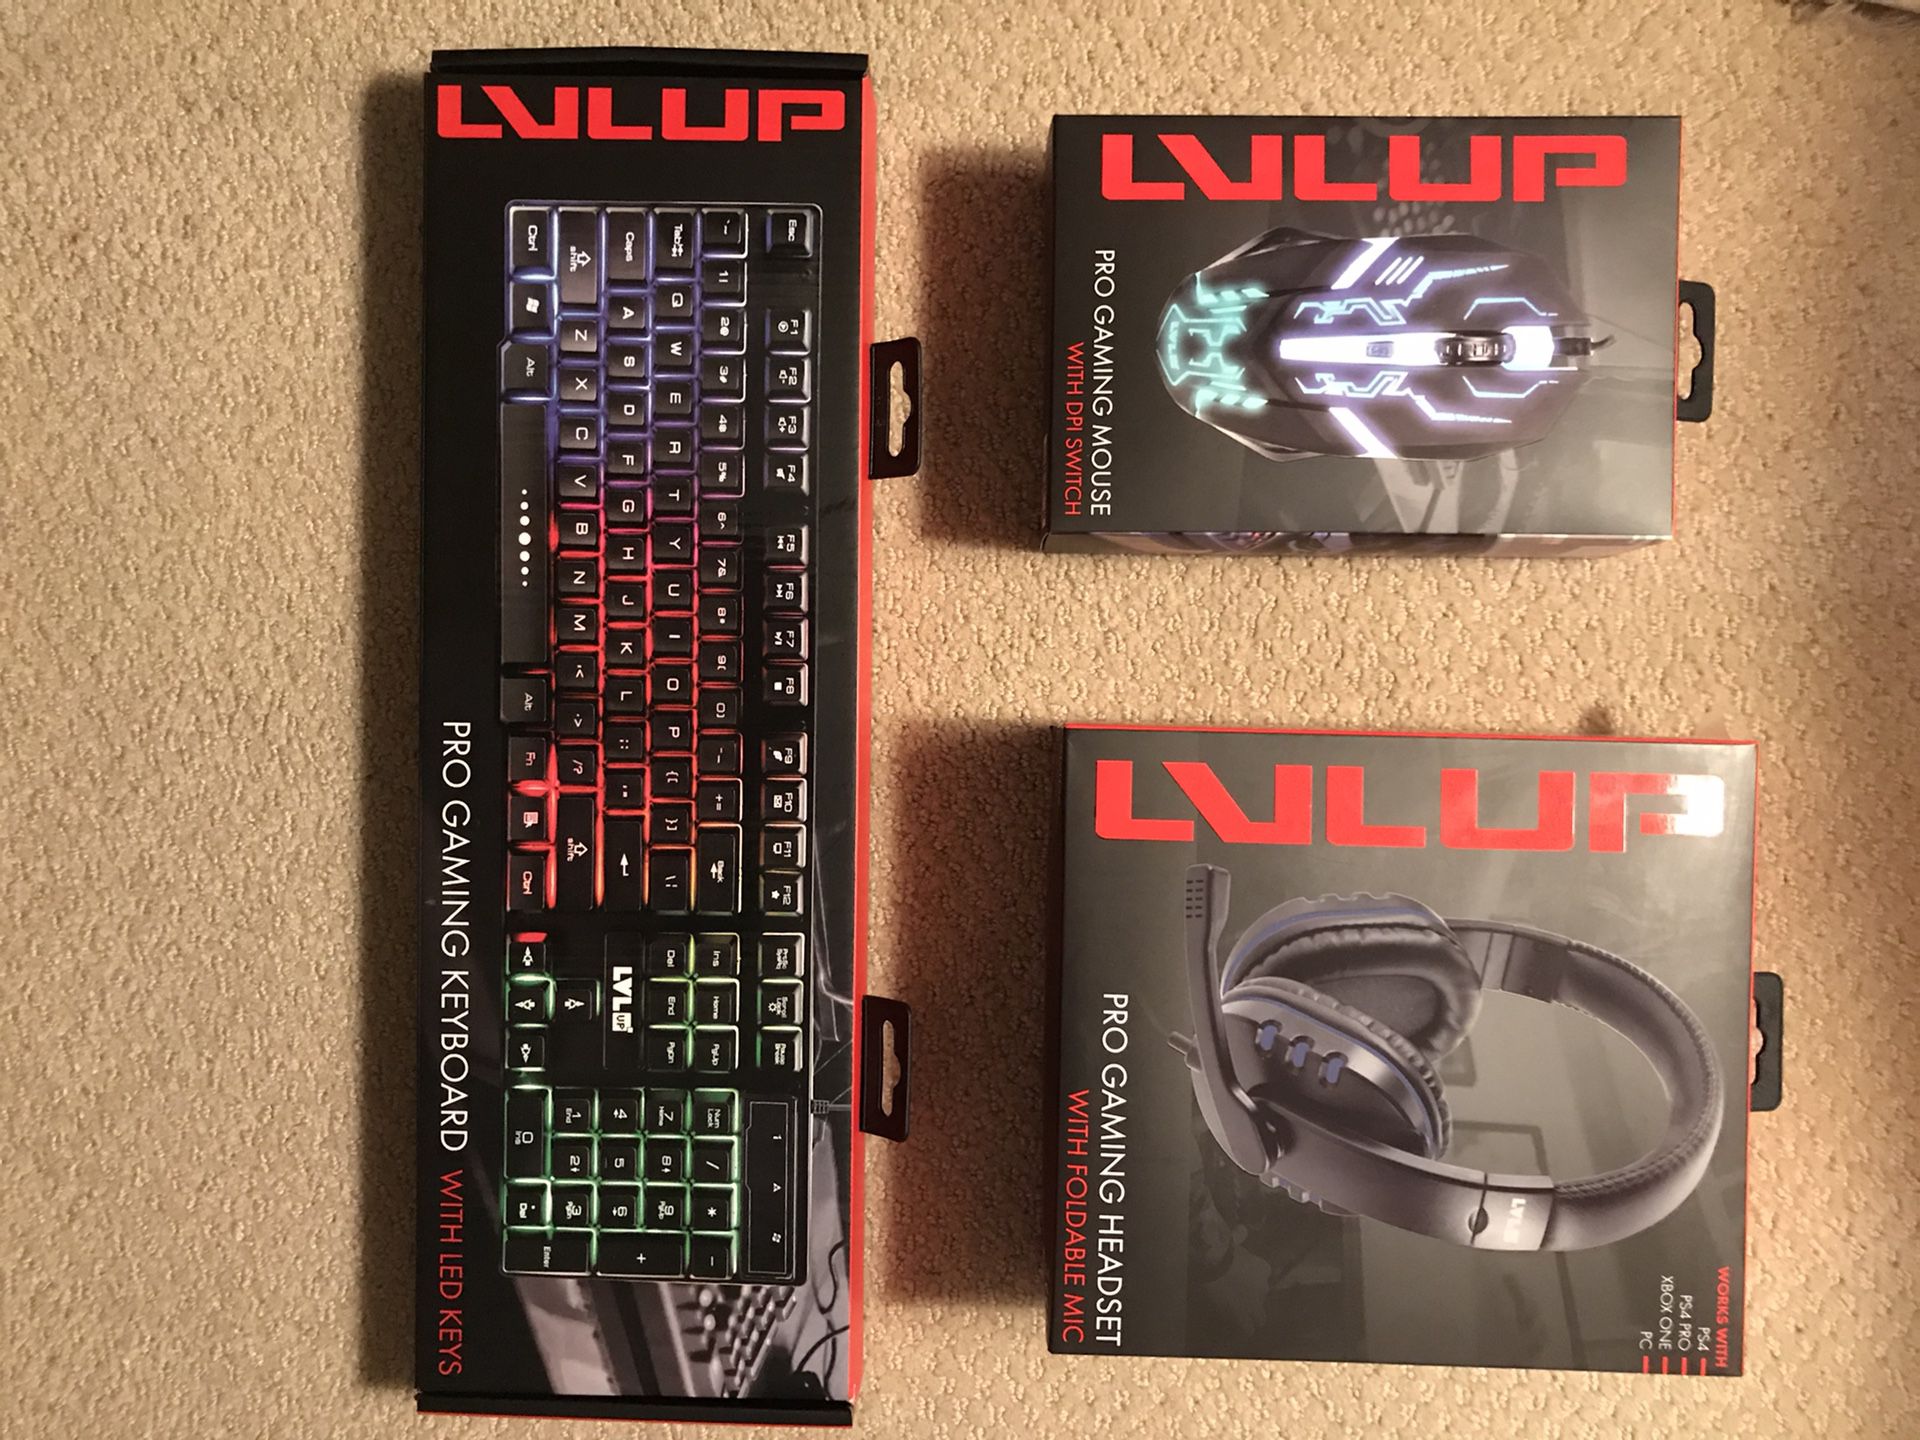 Level Up gaming headset keyboard and mouse bundle